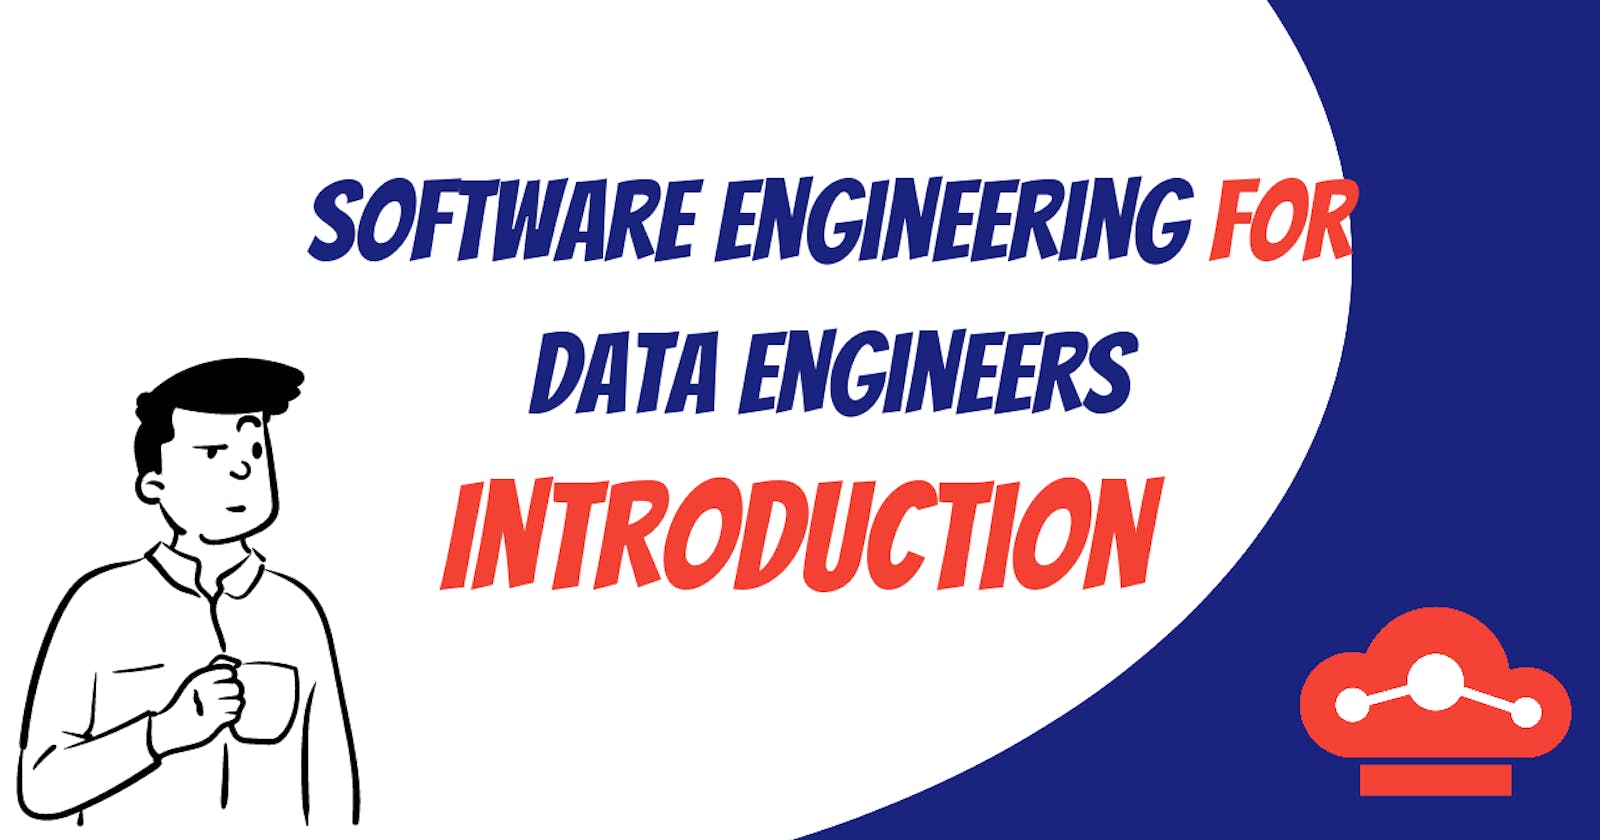 Software Engineering for Data Engineers: Introduction